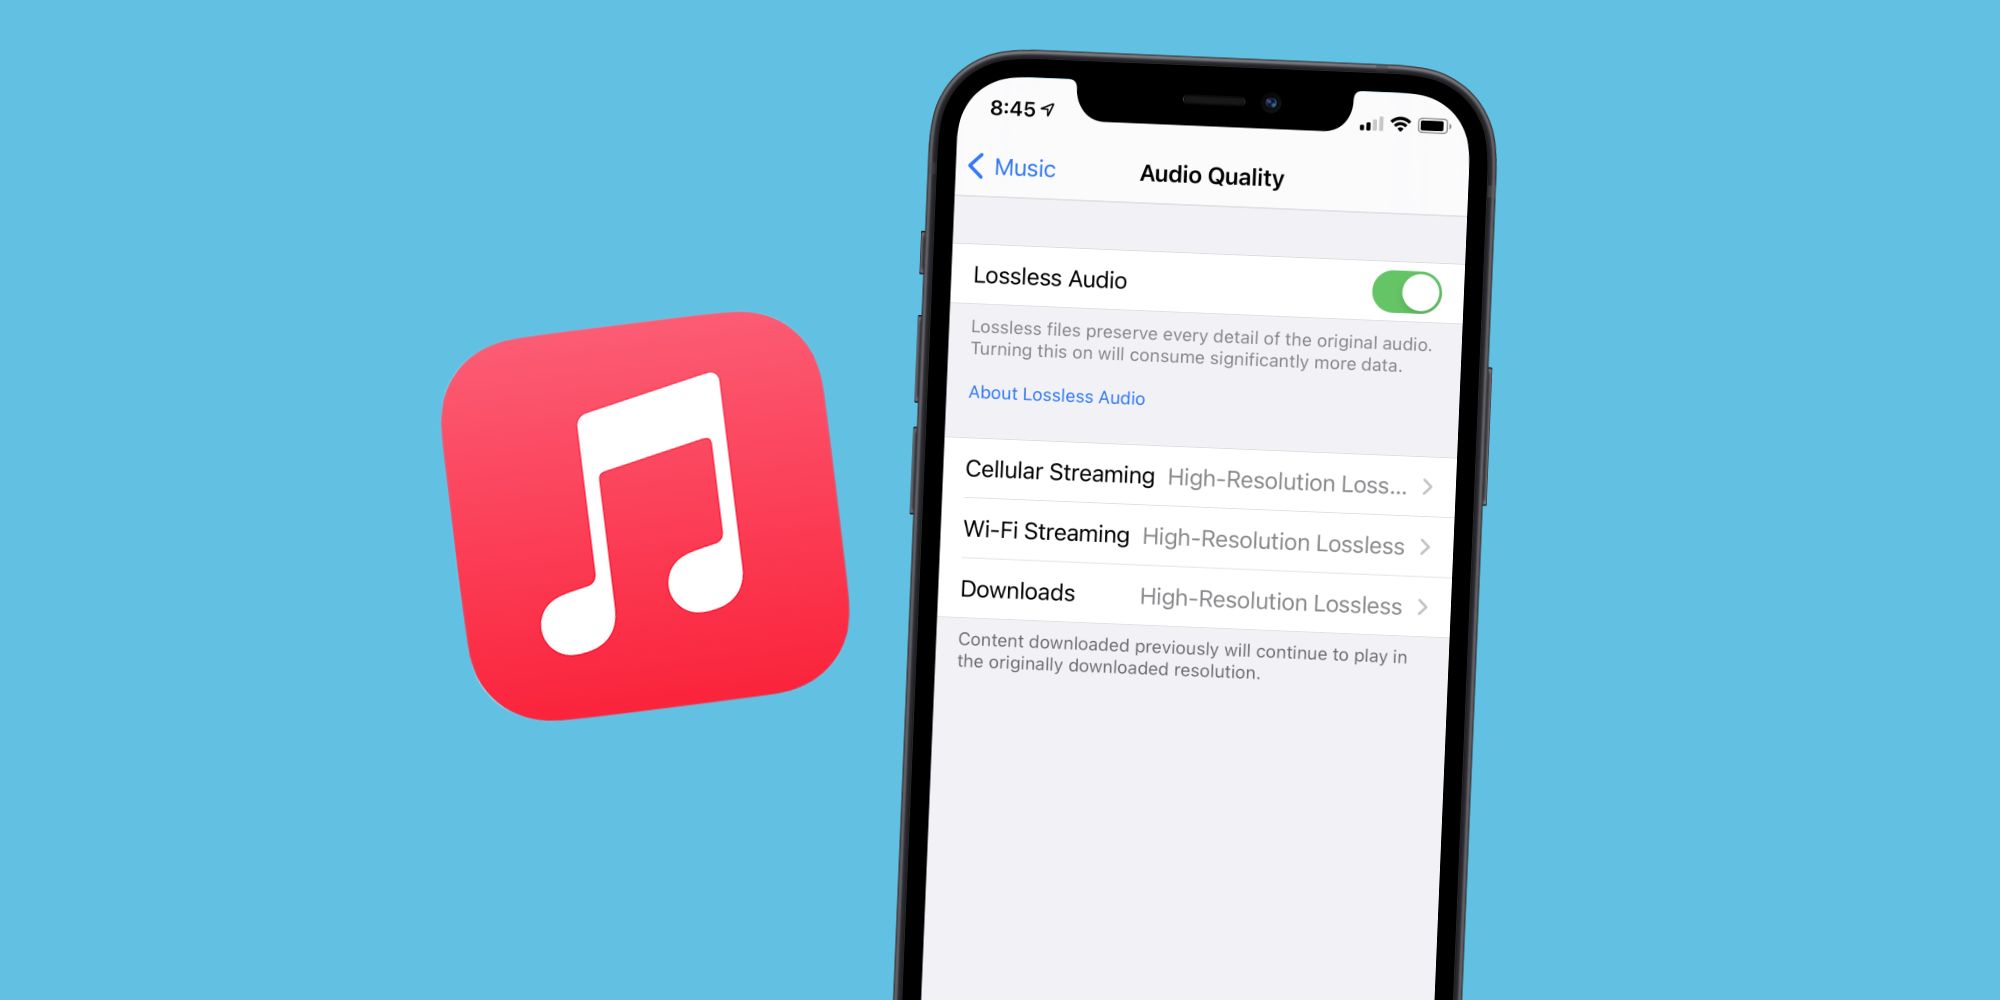 How To Change Apple Music Audio Quality On iPhone